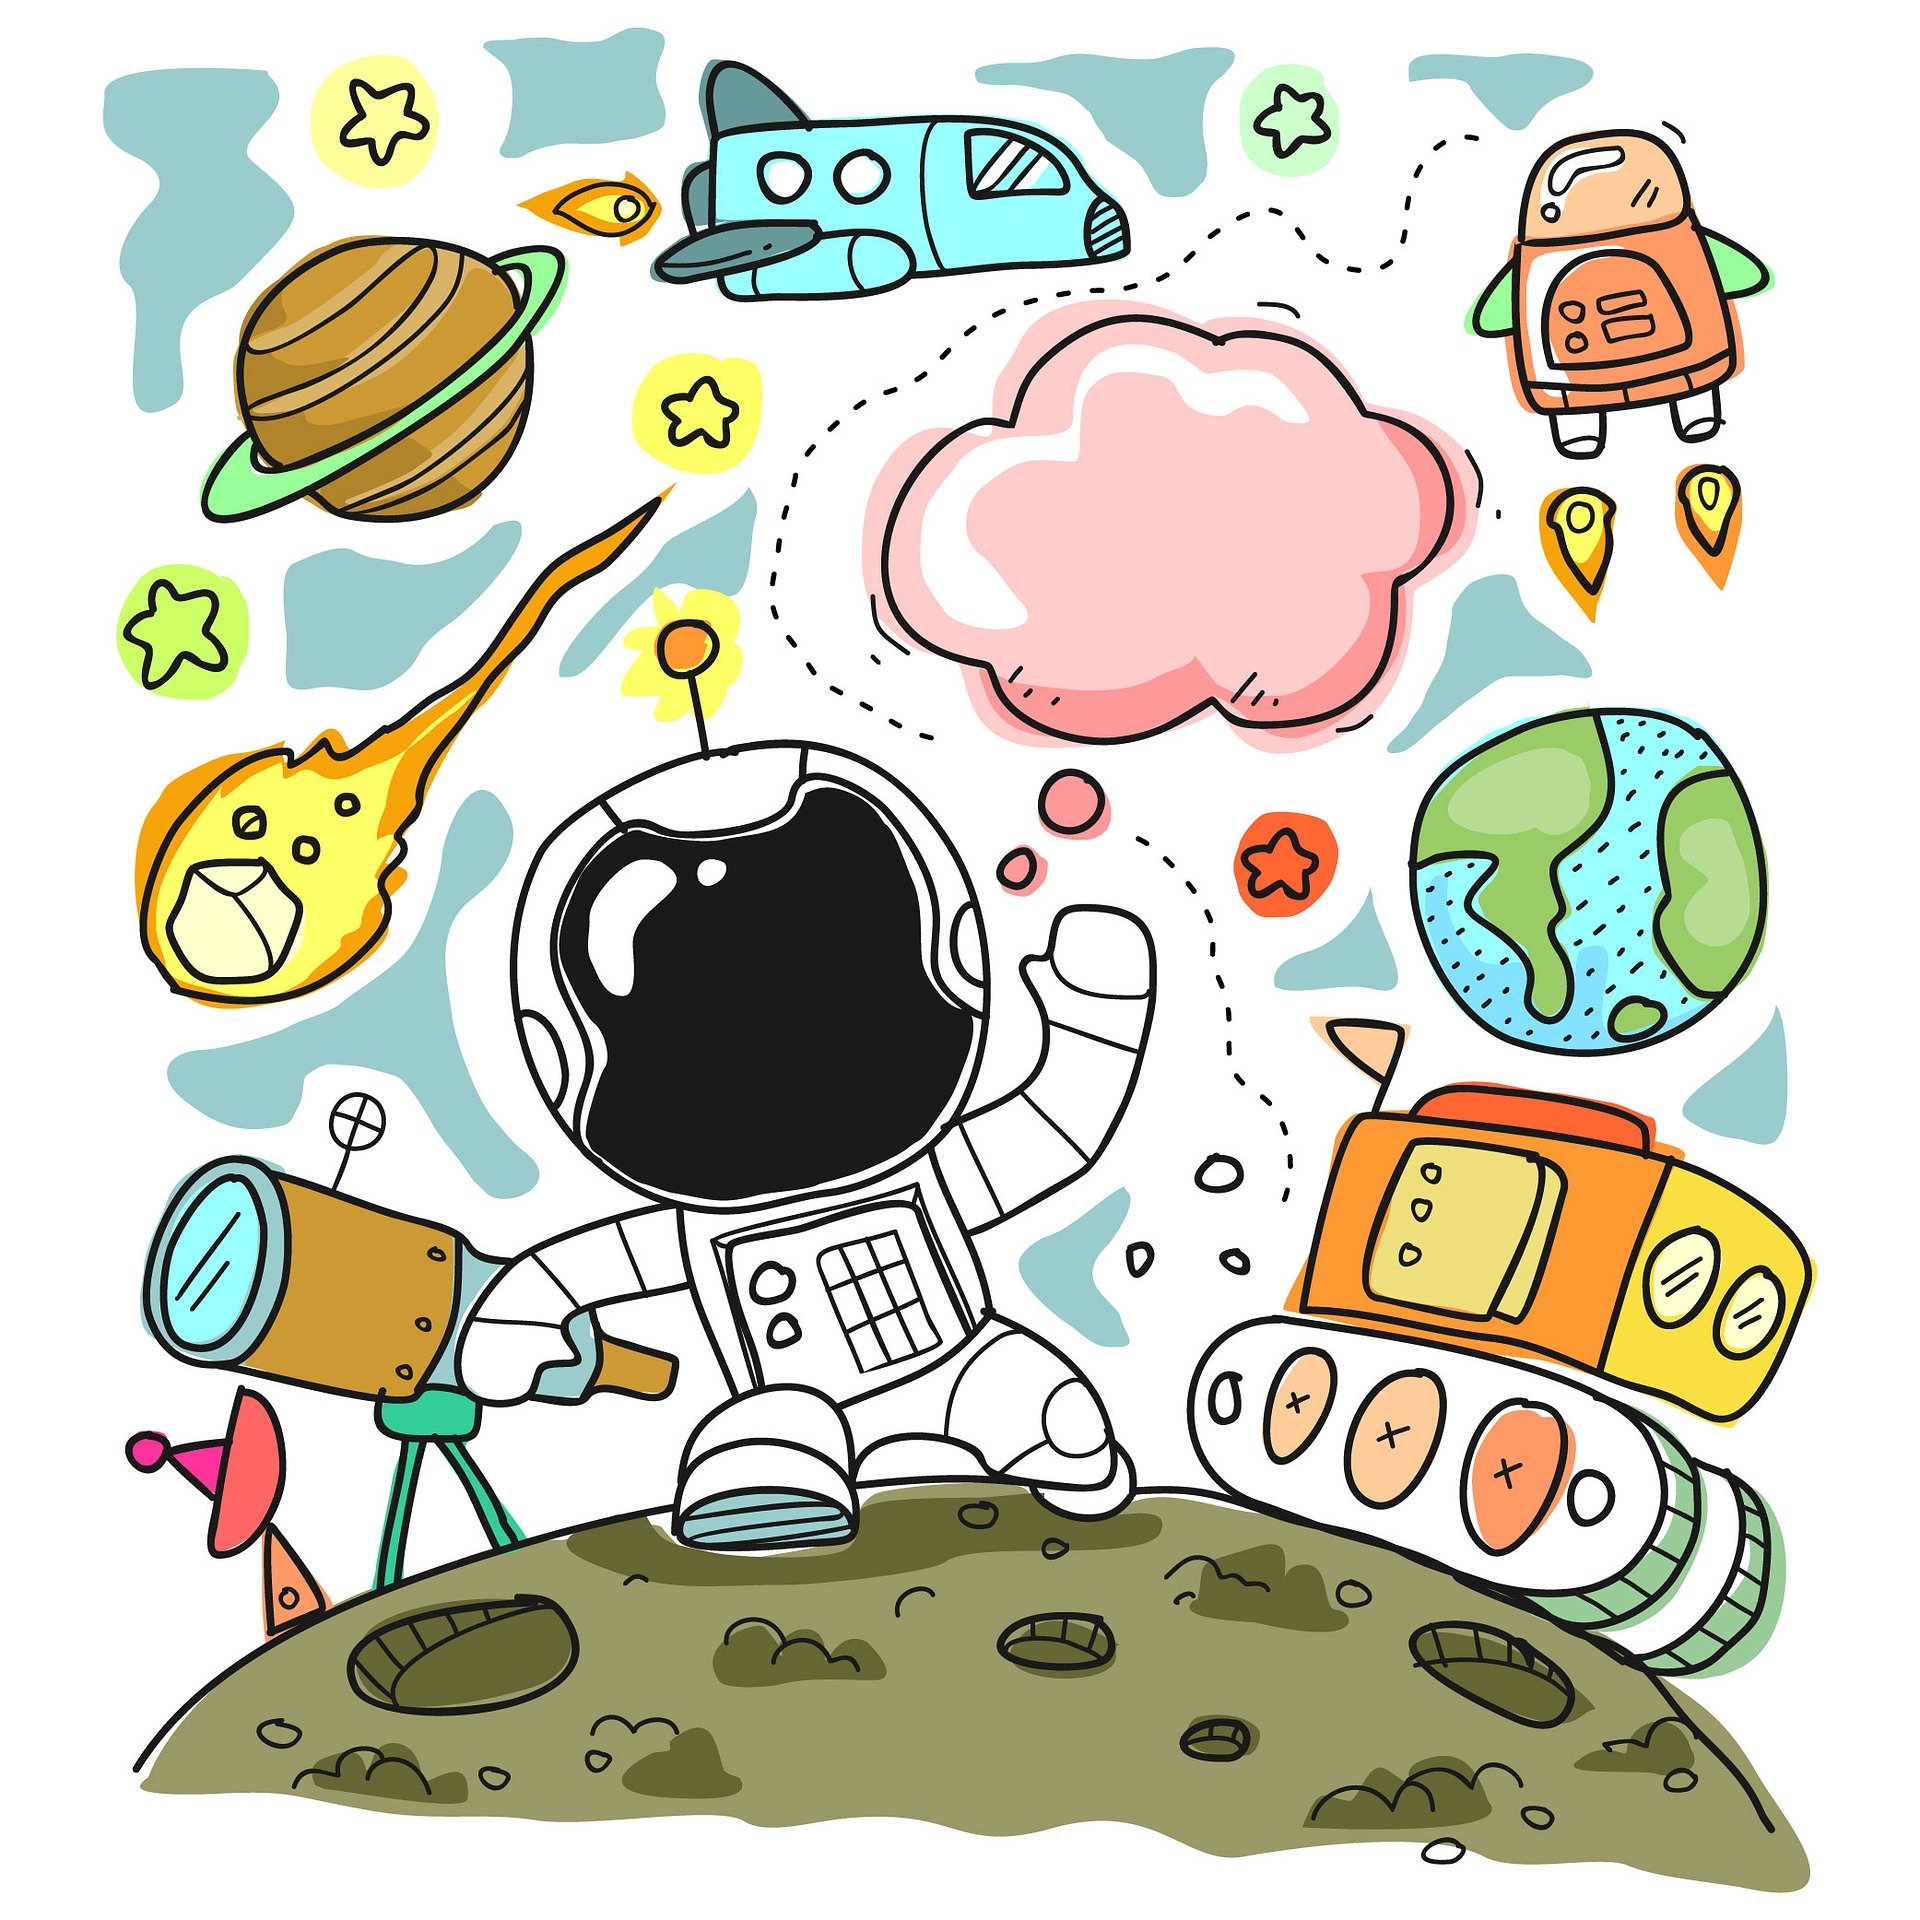 Cartoon of child-sized astronaut on moon with thought bubble, surrounded by space-related technologies